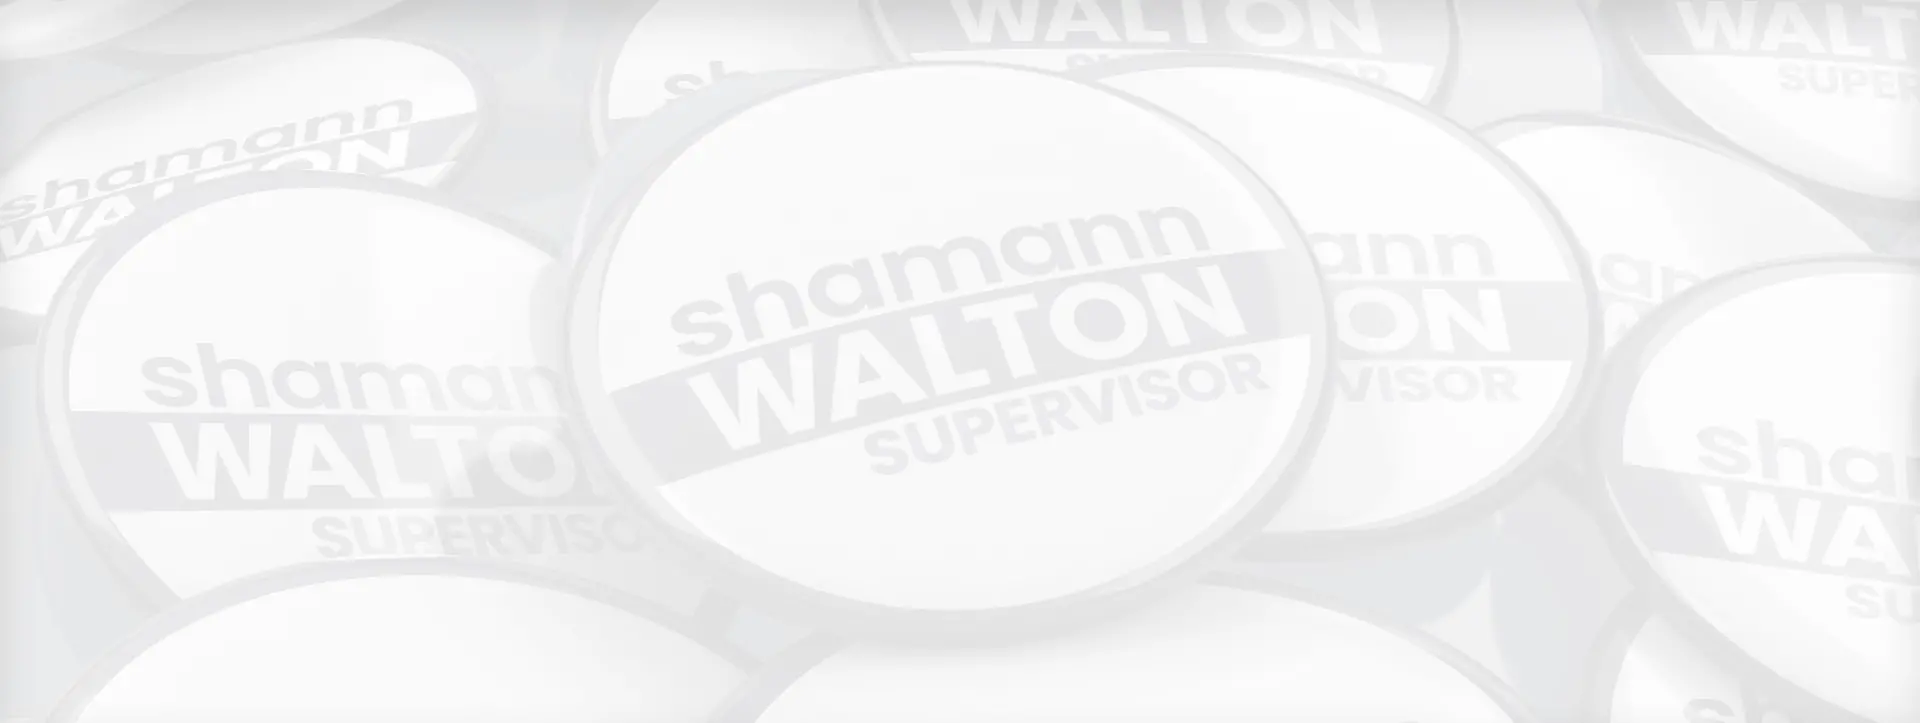 Faded black & white background image of several Shamann Walton election pin buttons